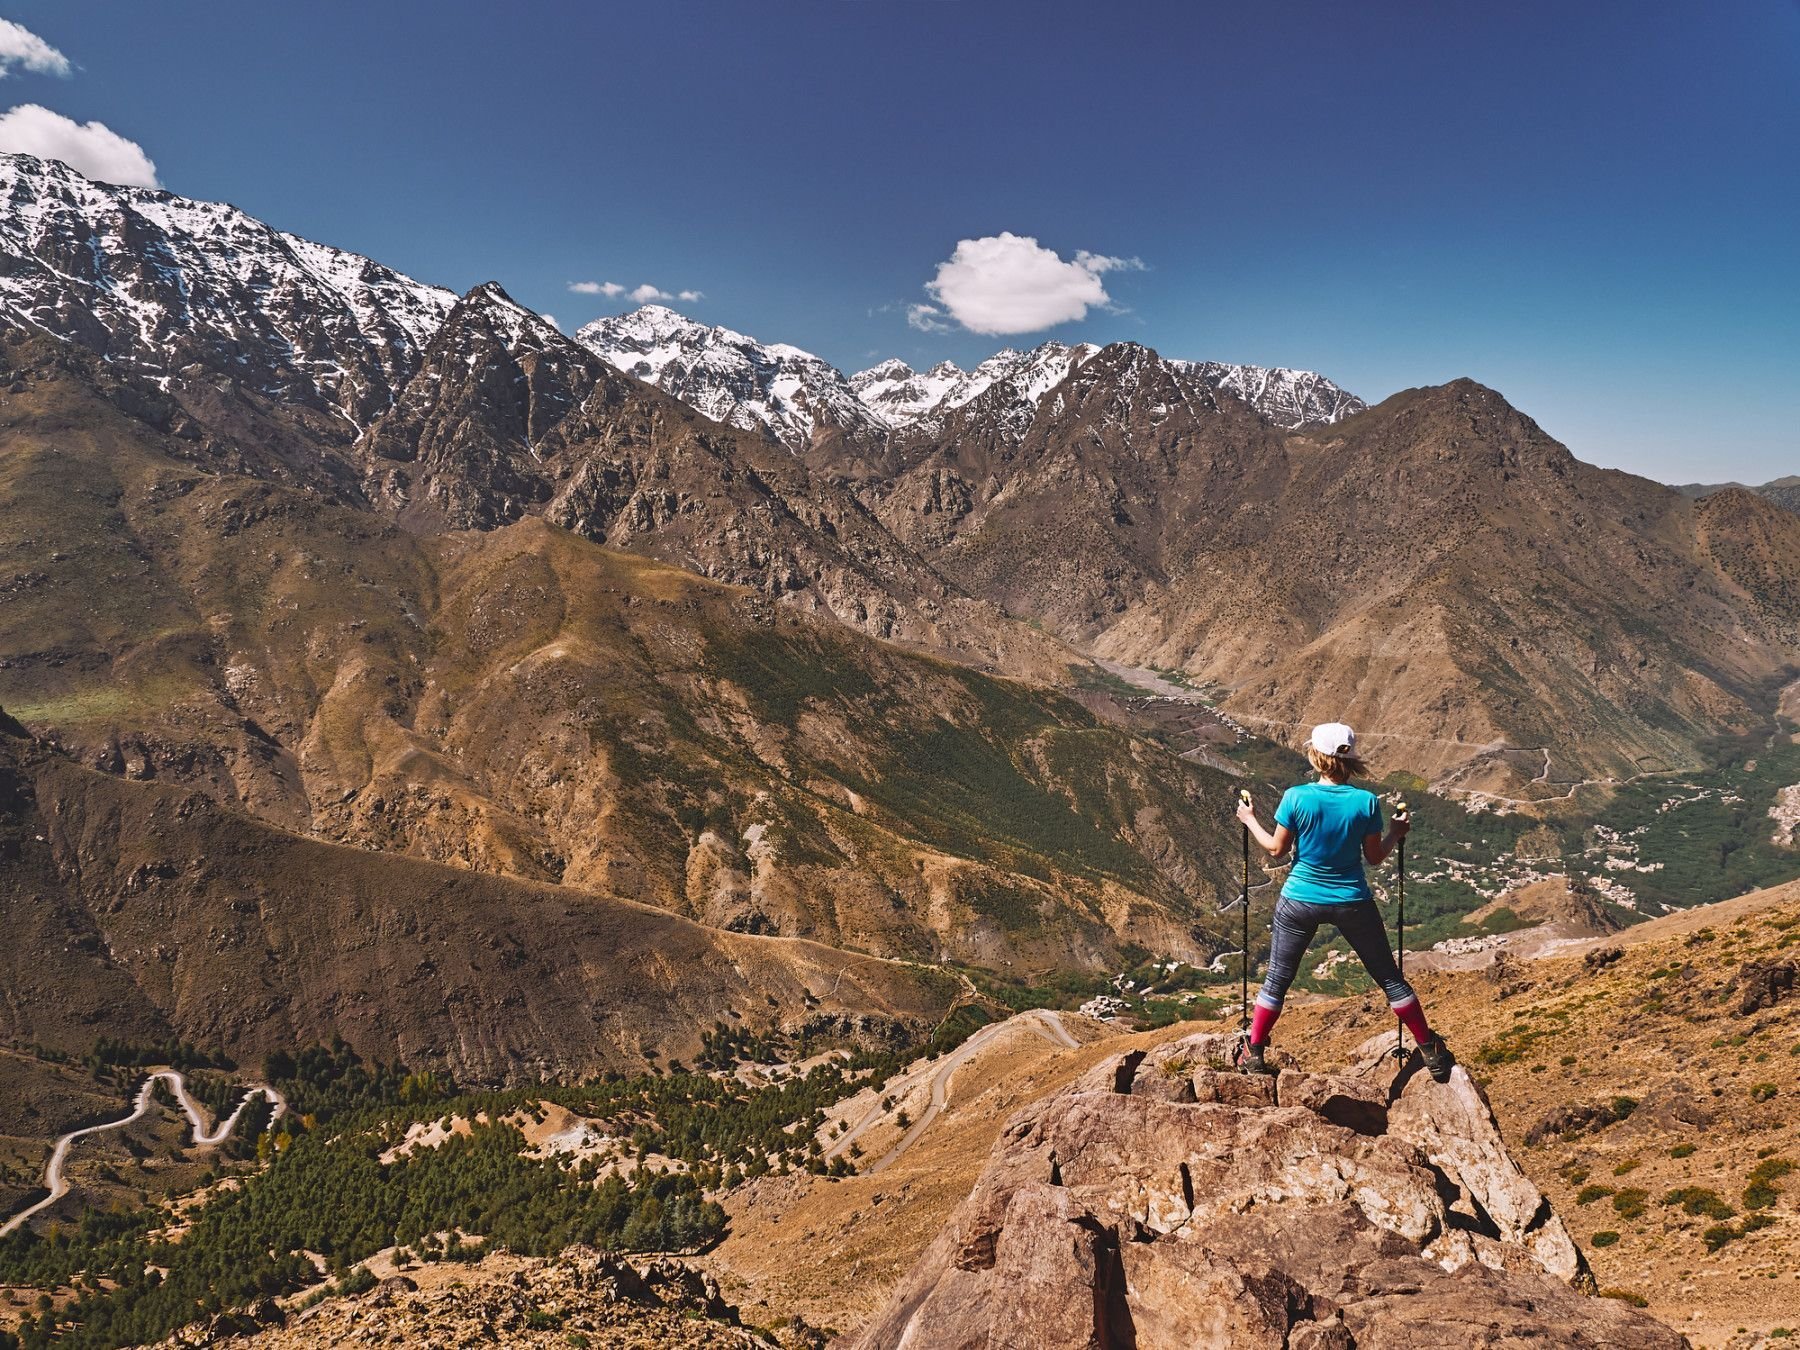 A woman hiker looks out at the High Atlas Mountain range in Morocco.